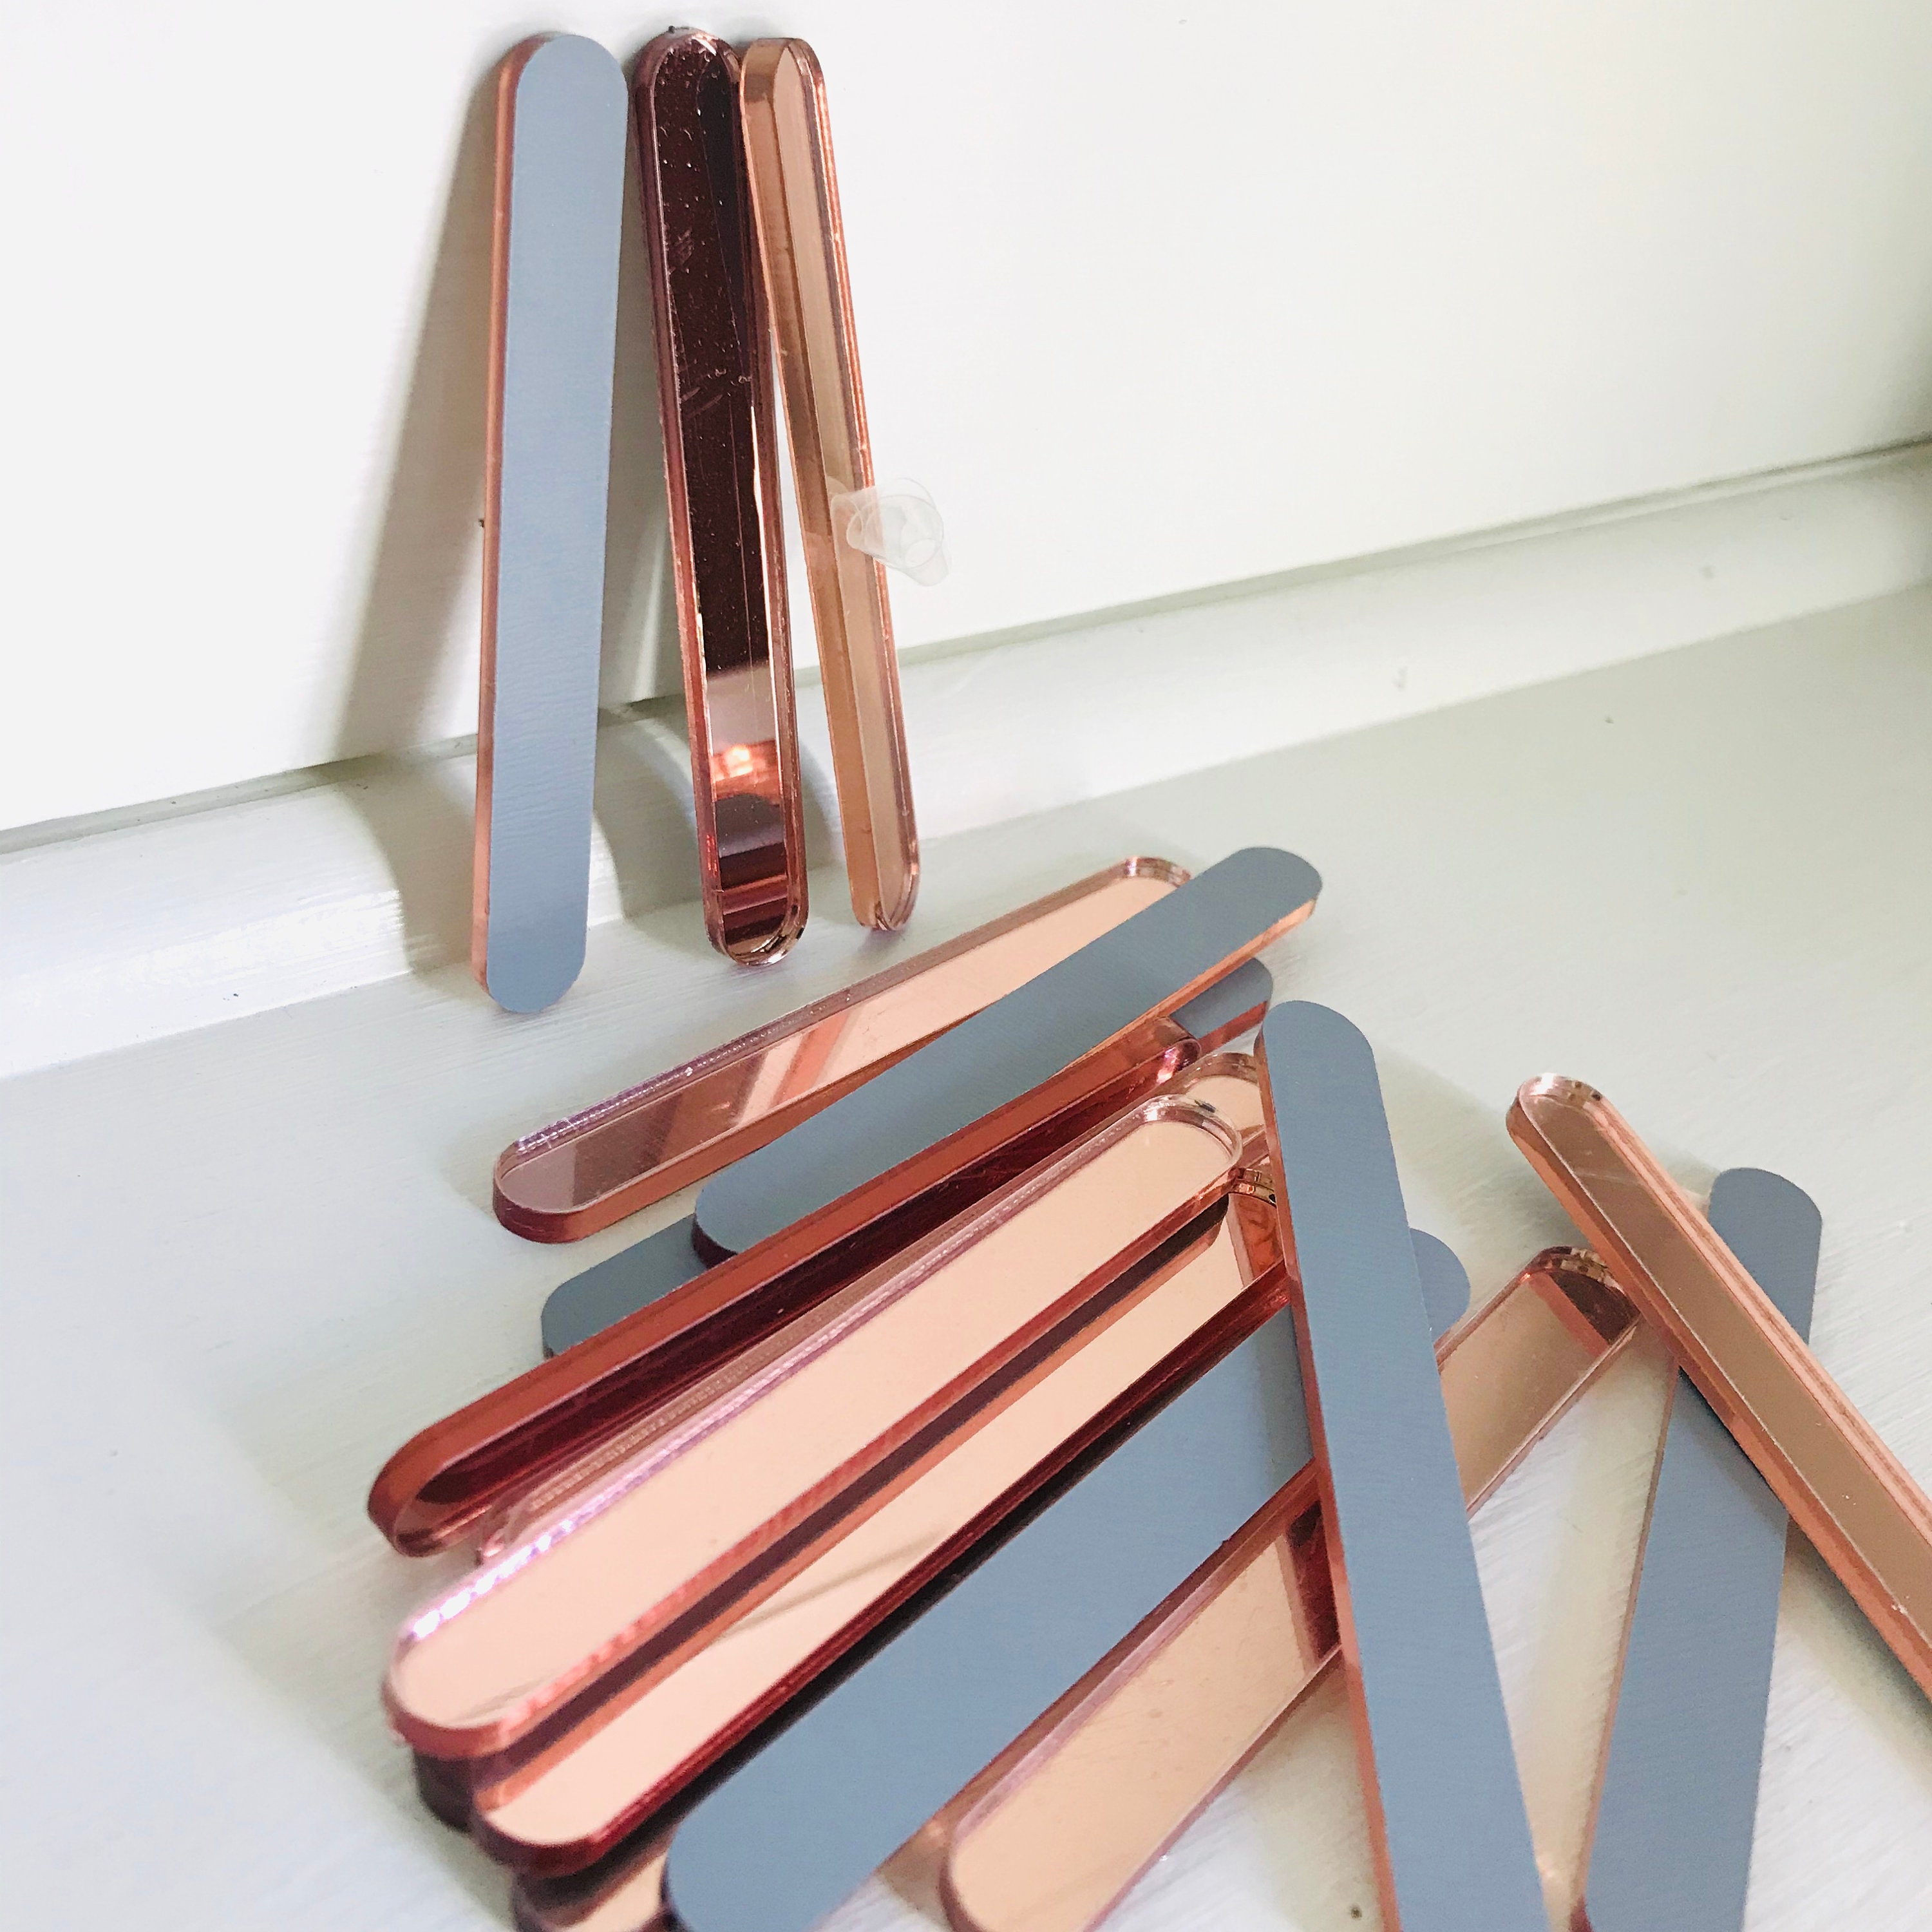 ACRYLIC POPSICLE STICKS ROSE GOLD 25PC — Cakers Warehouse